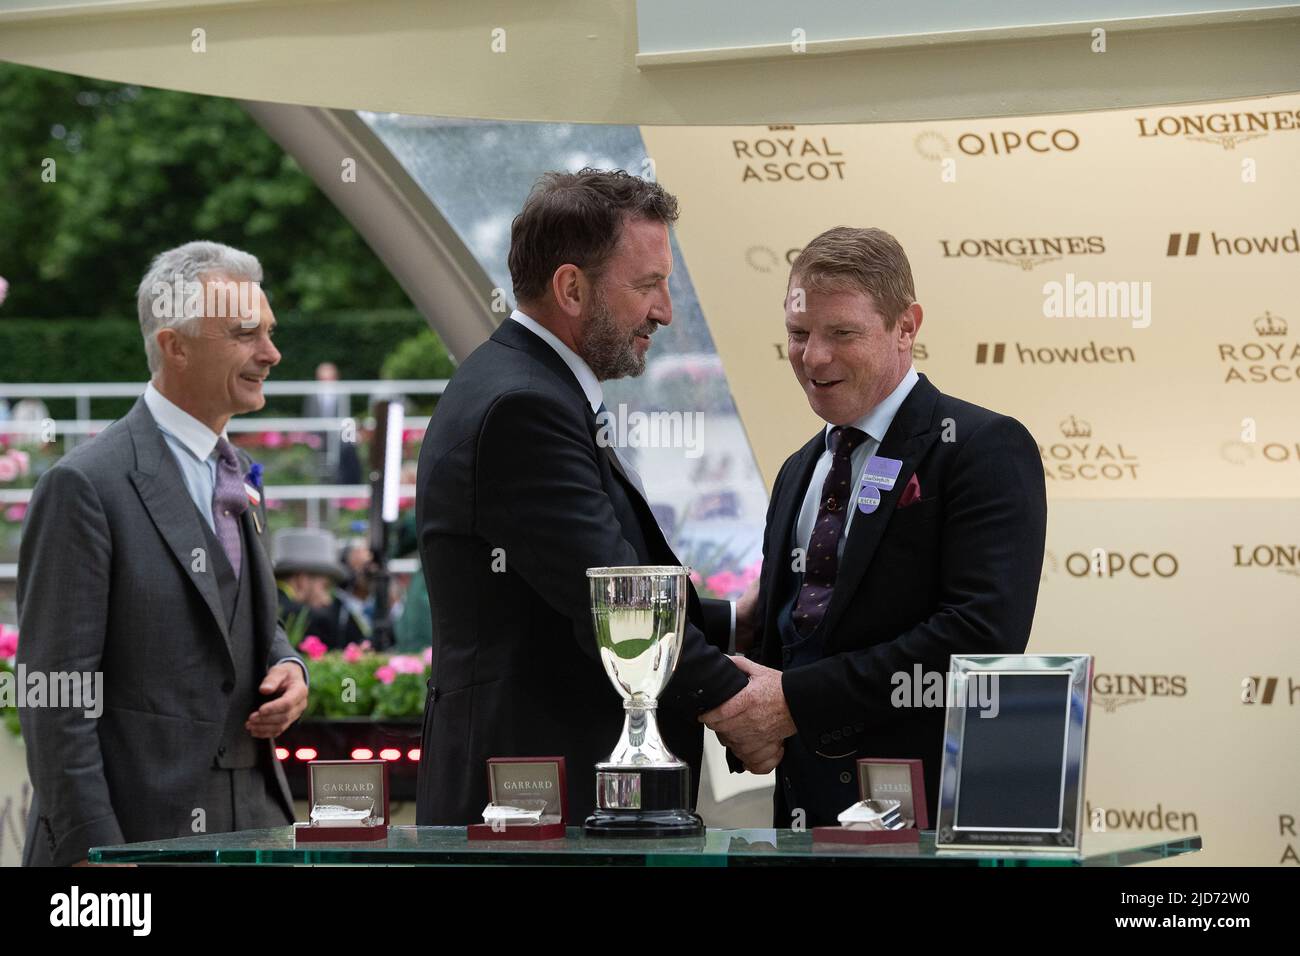 Ascot, Berkshire, UK. 18th June, 2022. Horse Missed the Cut ridden by jockey James McDonald won the Golden Gates Stakes race at Royal Ascot today. Owner Ed Babington. Trainer George Boughey. Comedian Lee Mack who appears in the comedy Not Going Out made the presentation to the winning owners and trainer. Credit: Maureen McLean/Alamy Live News Stock Photo